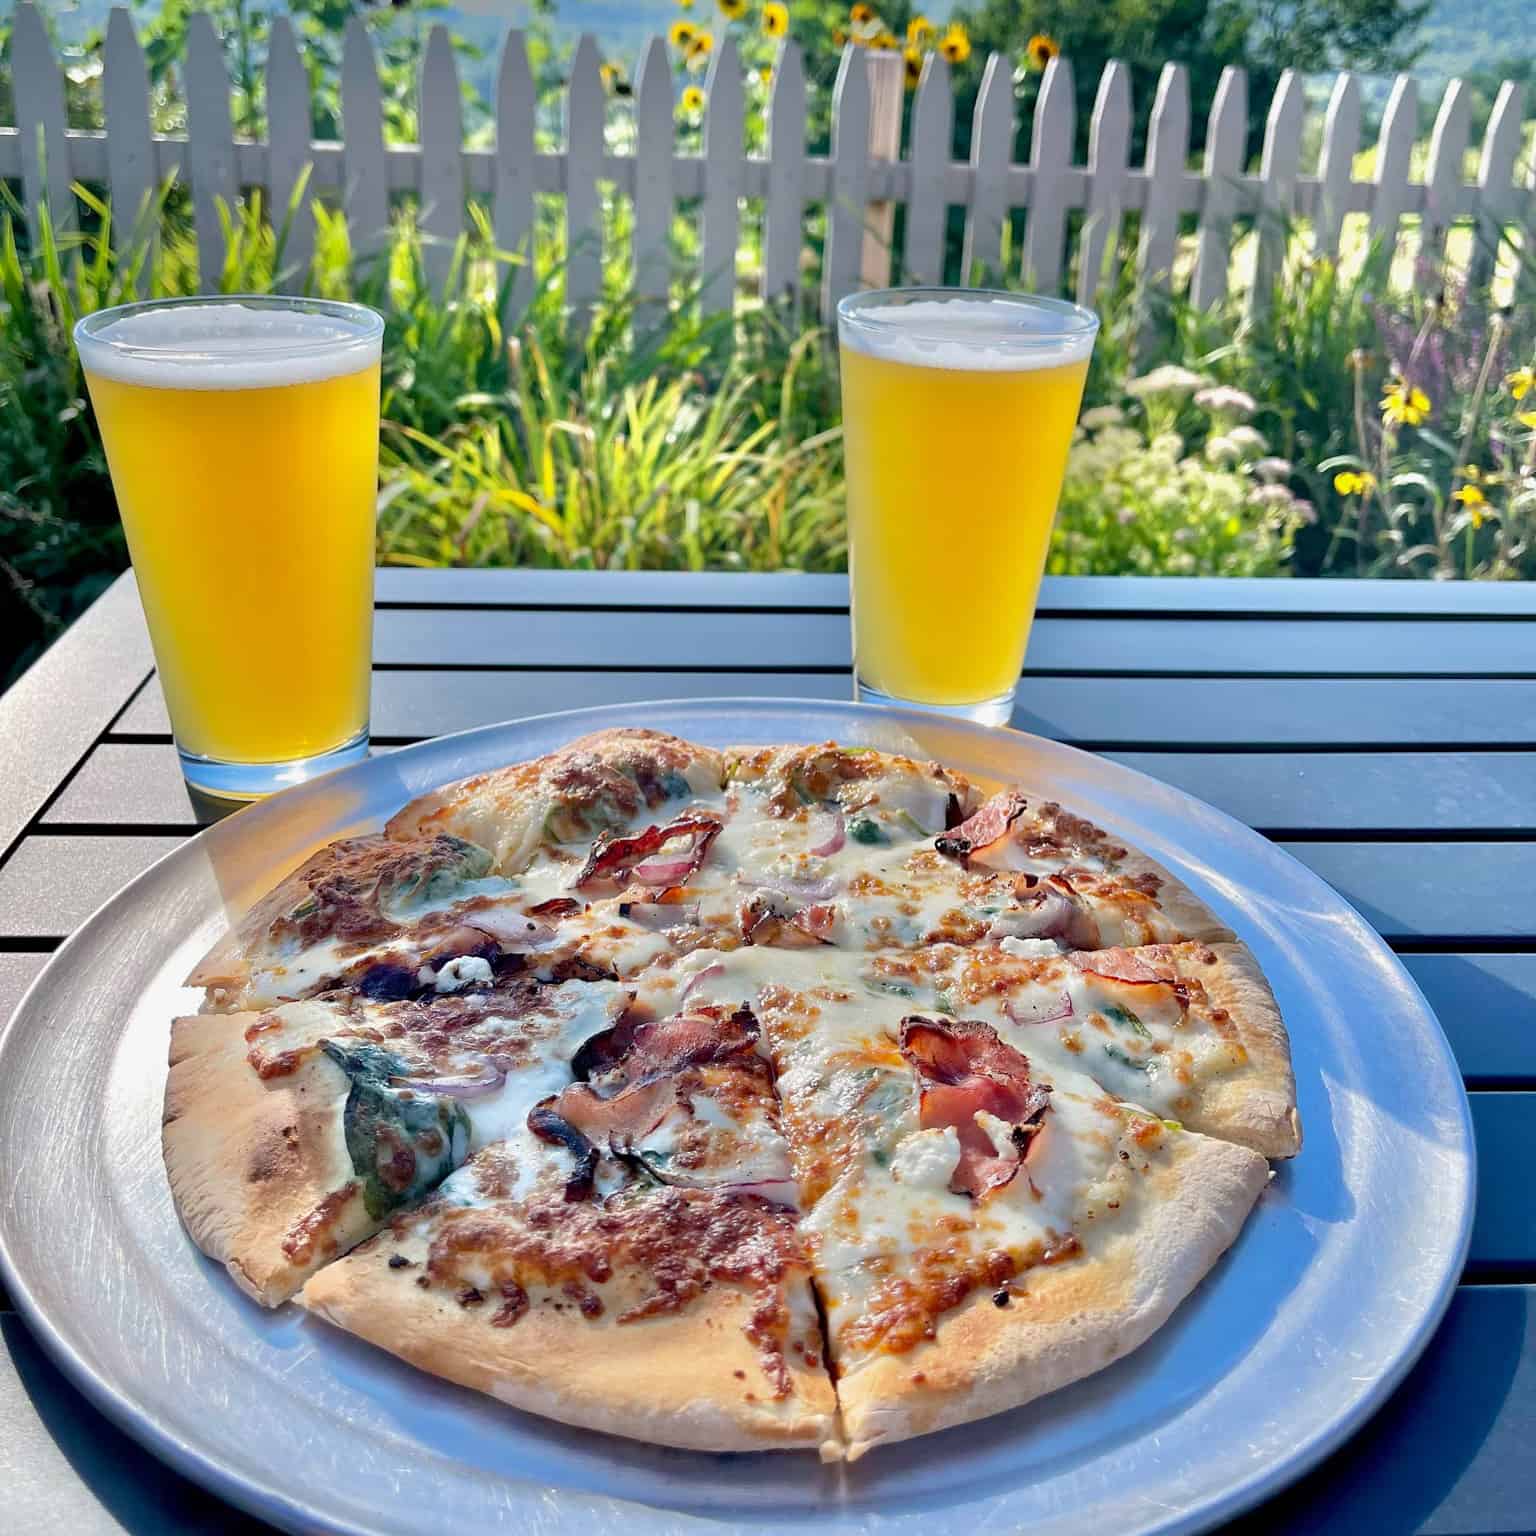 Juniper's at the Wildflower Inn - Pizza & Beer - Cropped